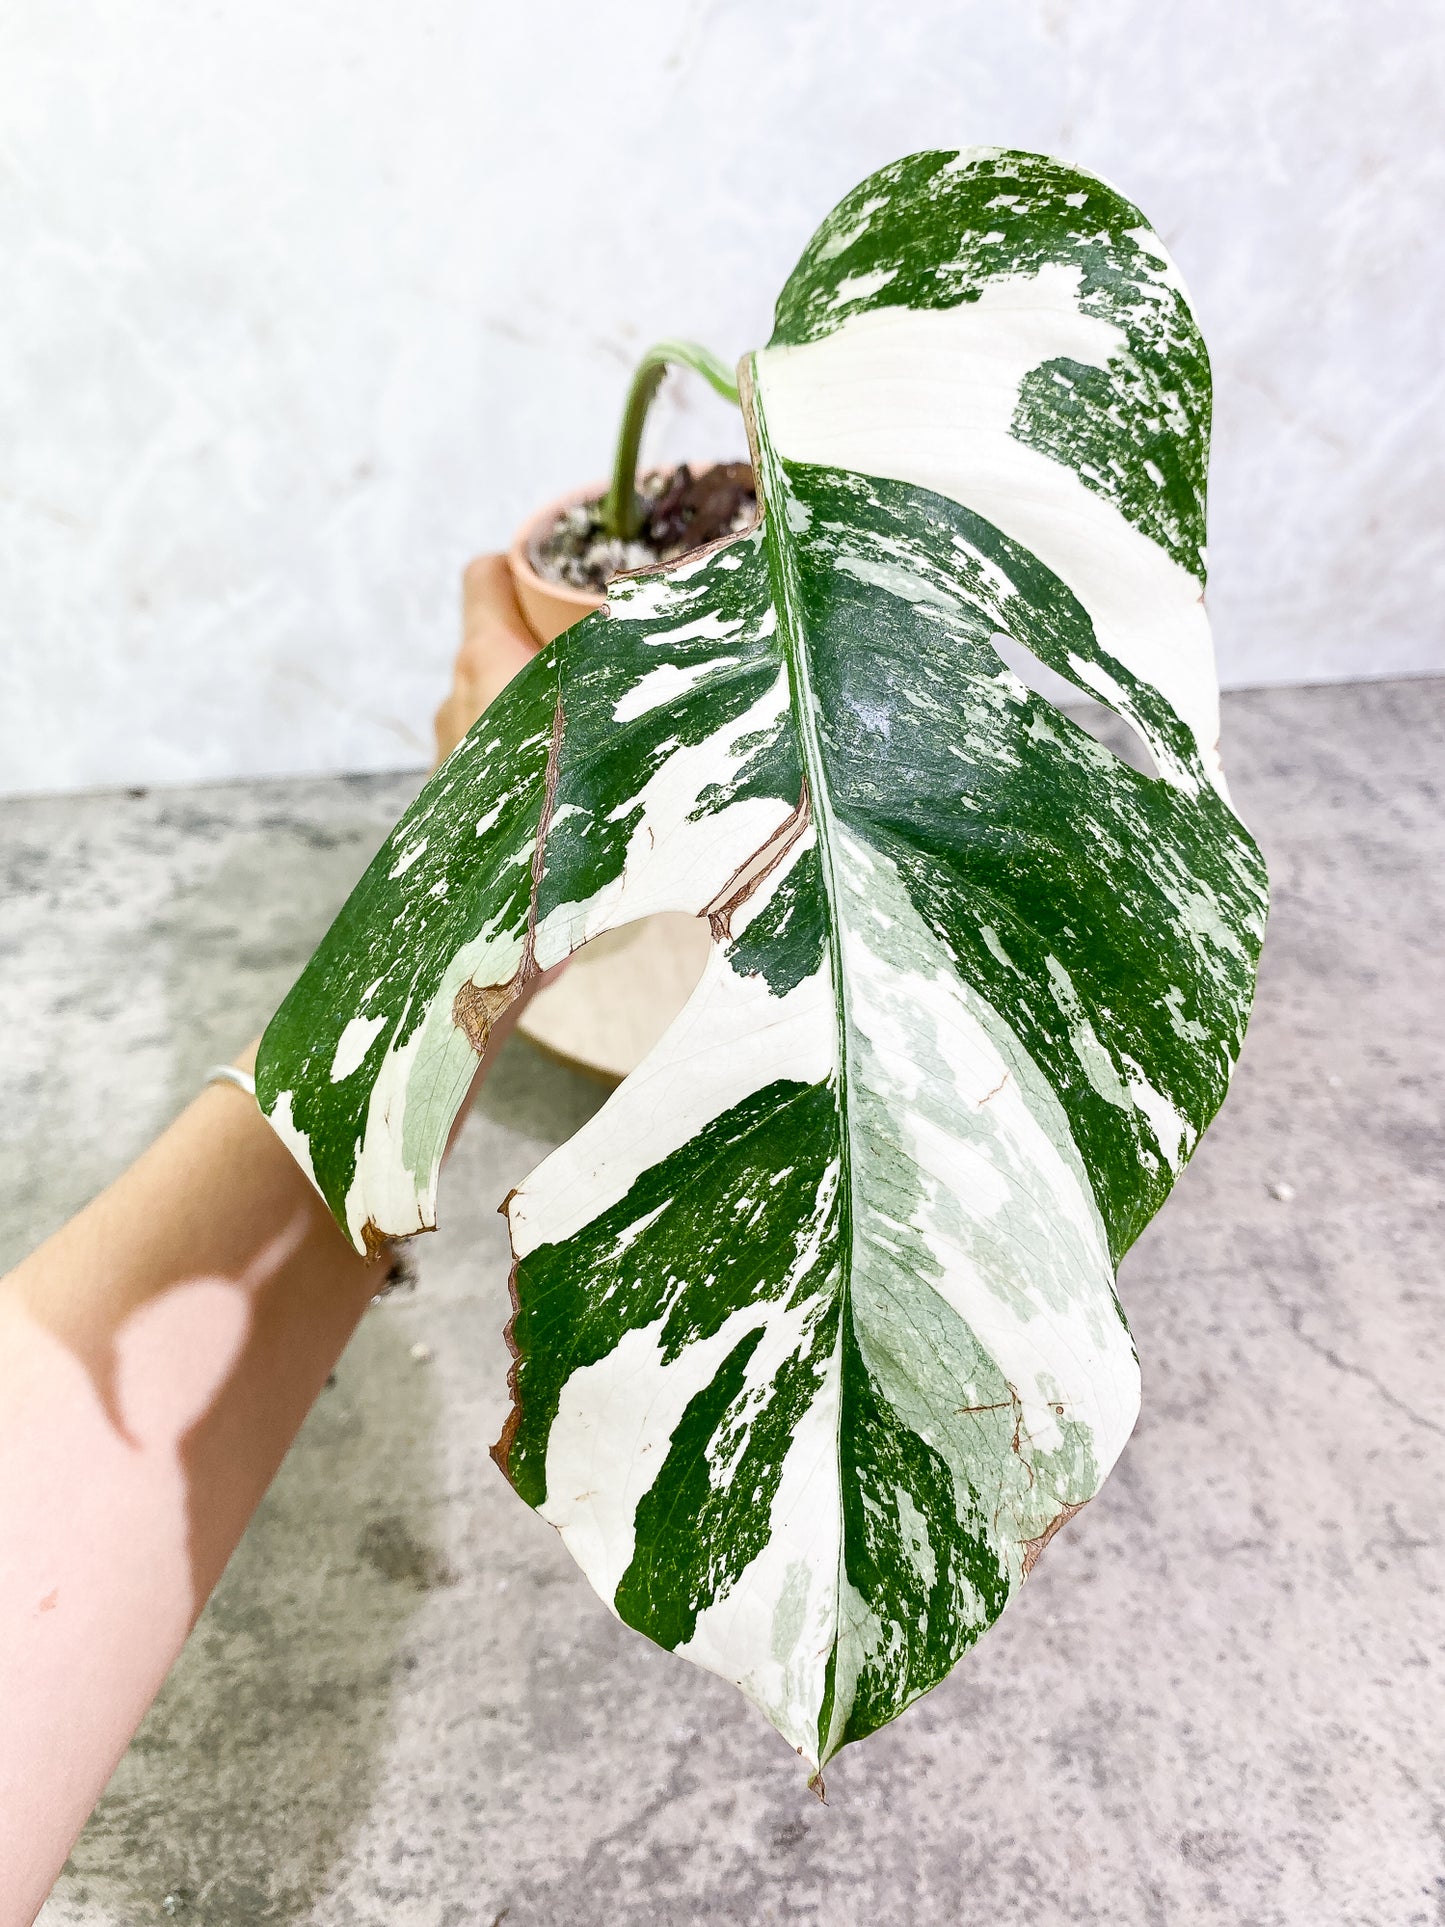 Monstera Albo Variegated 1leaf 1sprout rooted